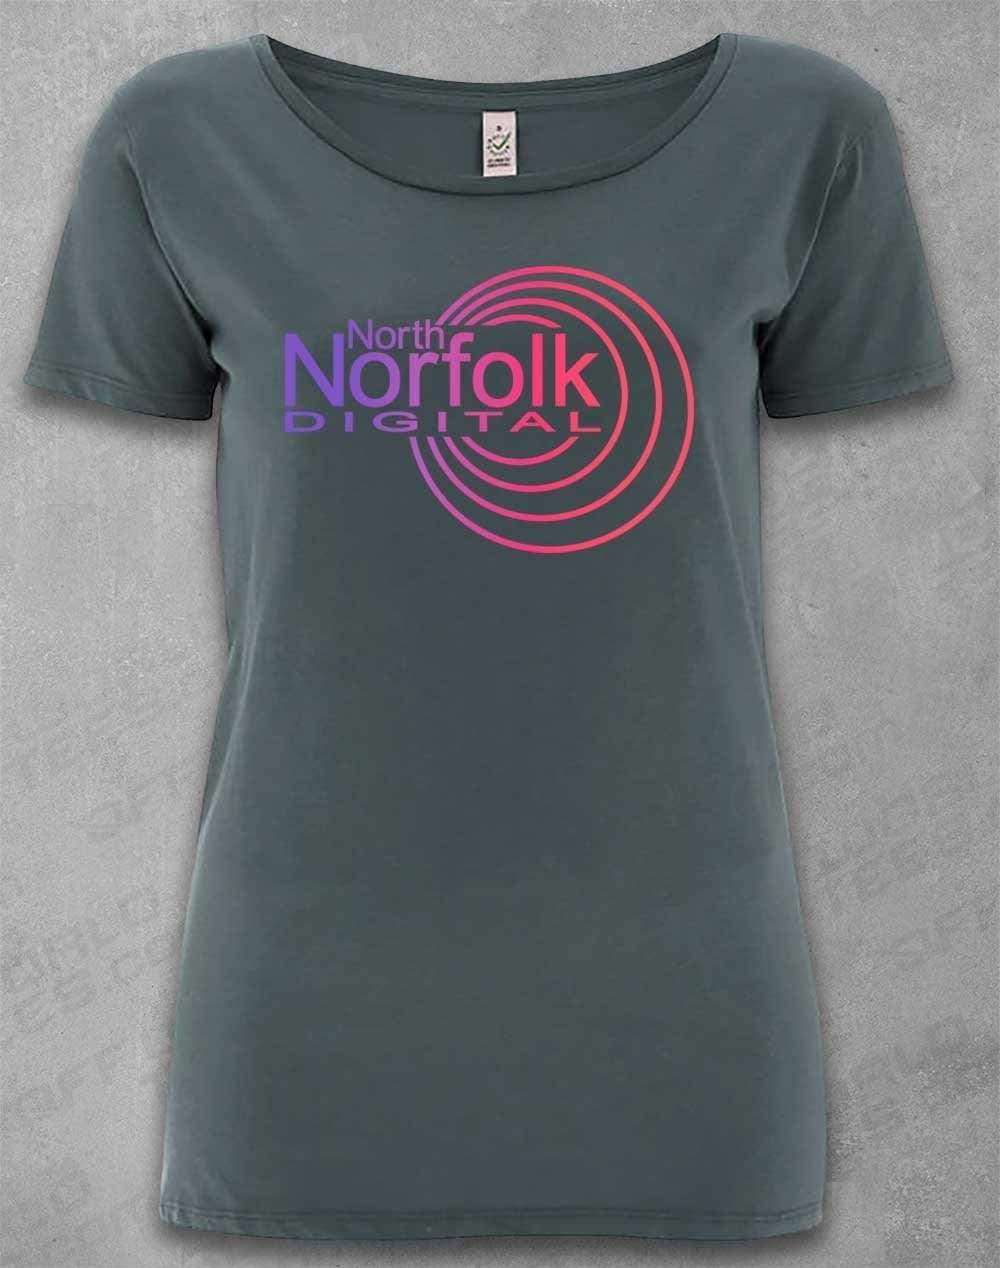 DELUXE North Norfolk Digital Organic Scoop Neck T-Shirt 8-10 / Light Charcoal  - Off World Tees